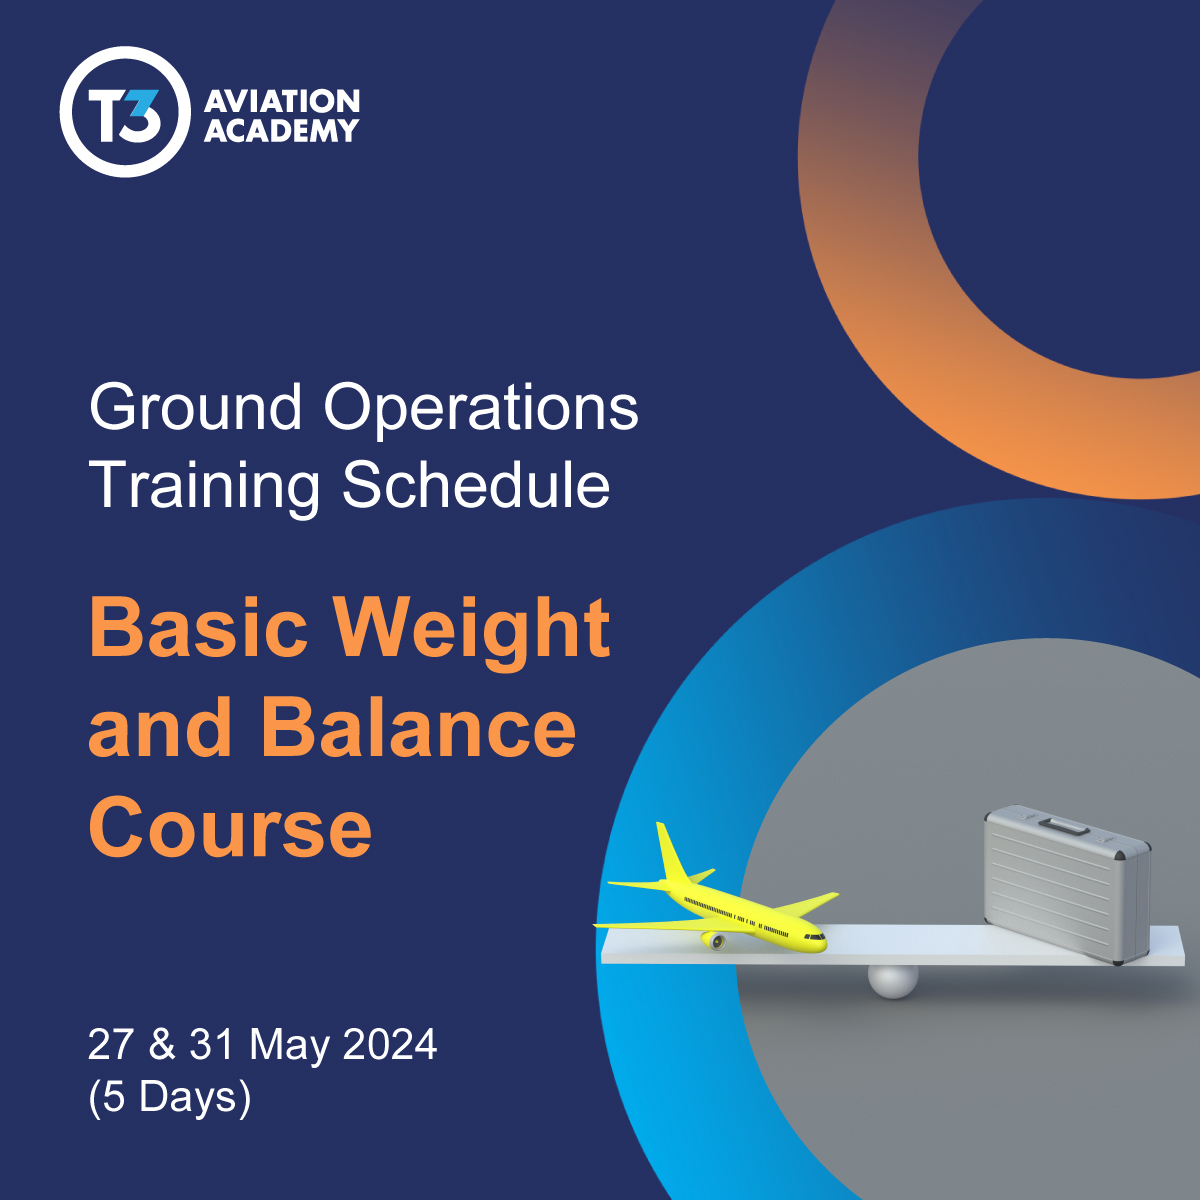 Book your seats now! ​

Contact +971 56 118 4524 or GOT_Care@t3a.academy for more information. ​

#t3aviationacademy #groundoperations #groundtraining